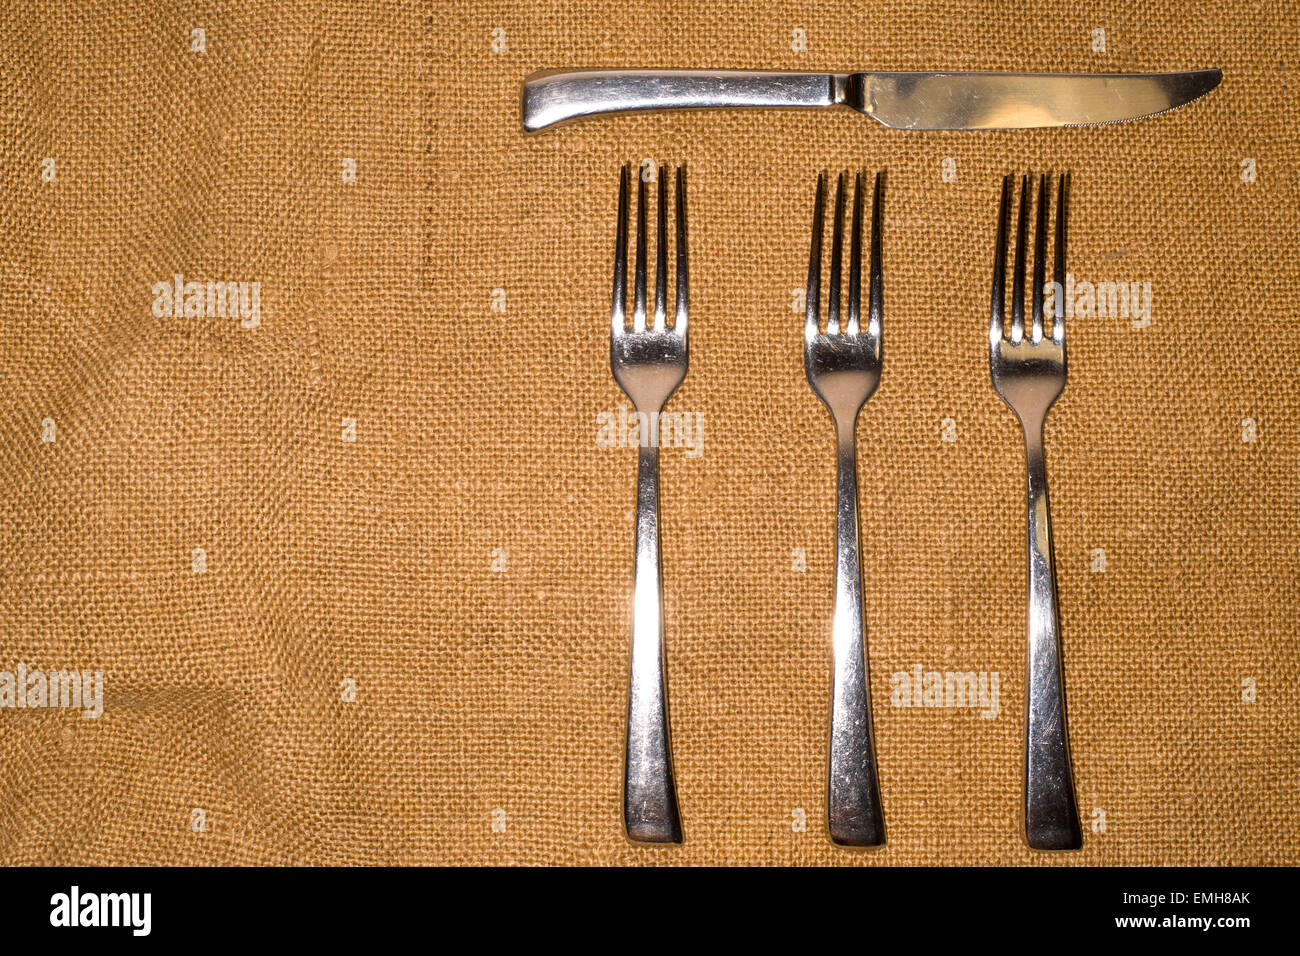 Three forks and knife on an old tablecloth Stock Photo